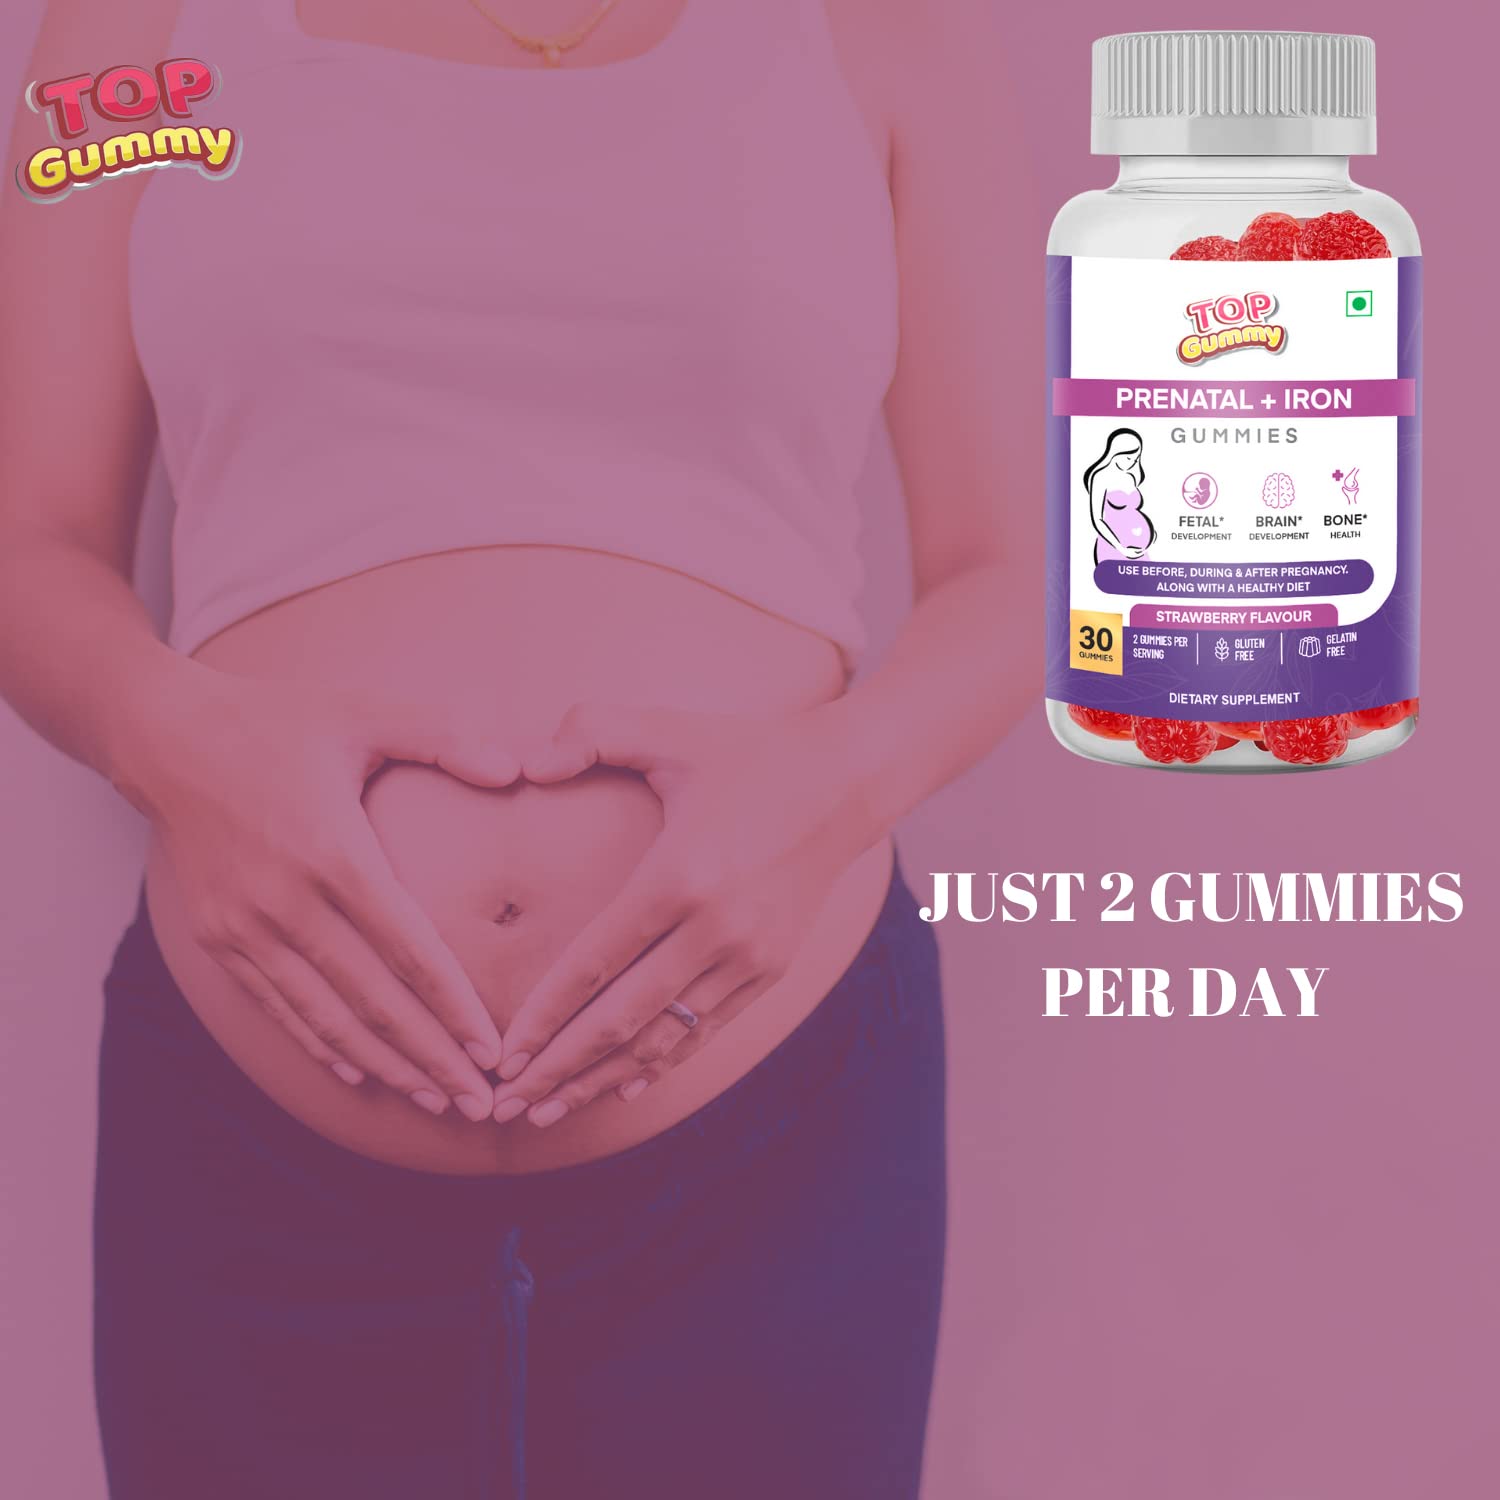 Top Gummy Prenatal + Iron with Vitamin B6, Vitamin B12 & Folic Acid | Use Before, During & After Pregnancy Along with a Healthy Diet - 30 Gummies (Strawberry Flavour) Gluten-Free (Pack of 3)